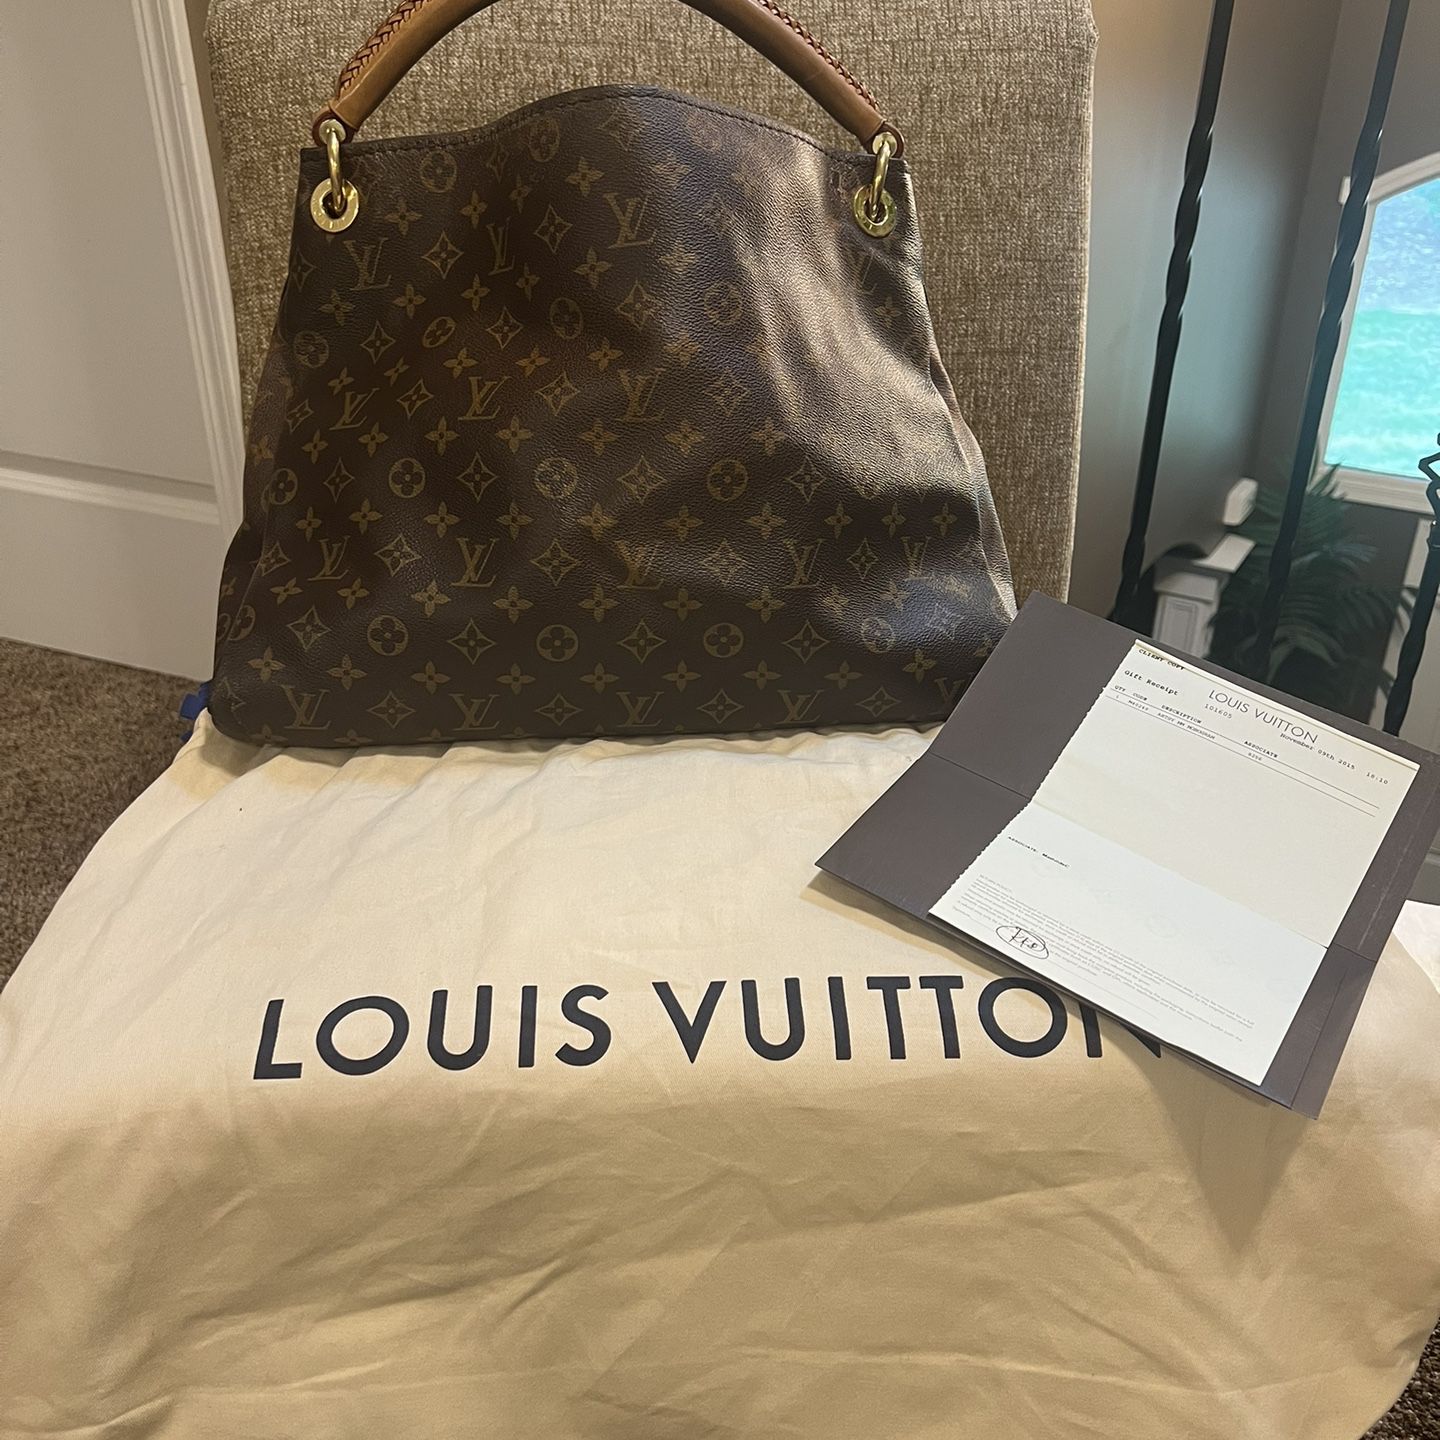 AUTHENTIC LV LOUIS VUITTON TOTALLY GM MONOGRAM BAG for Sale in Lake Villa,  IL - OfferUp